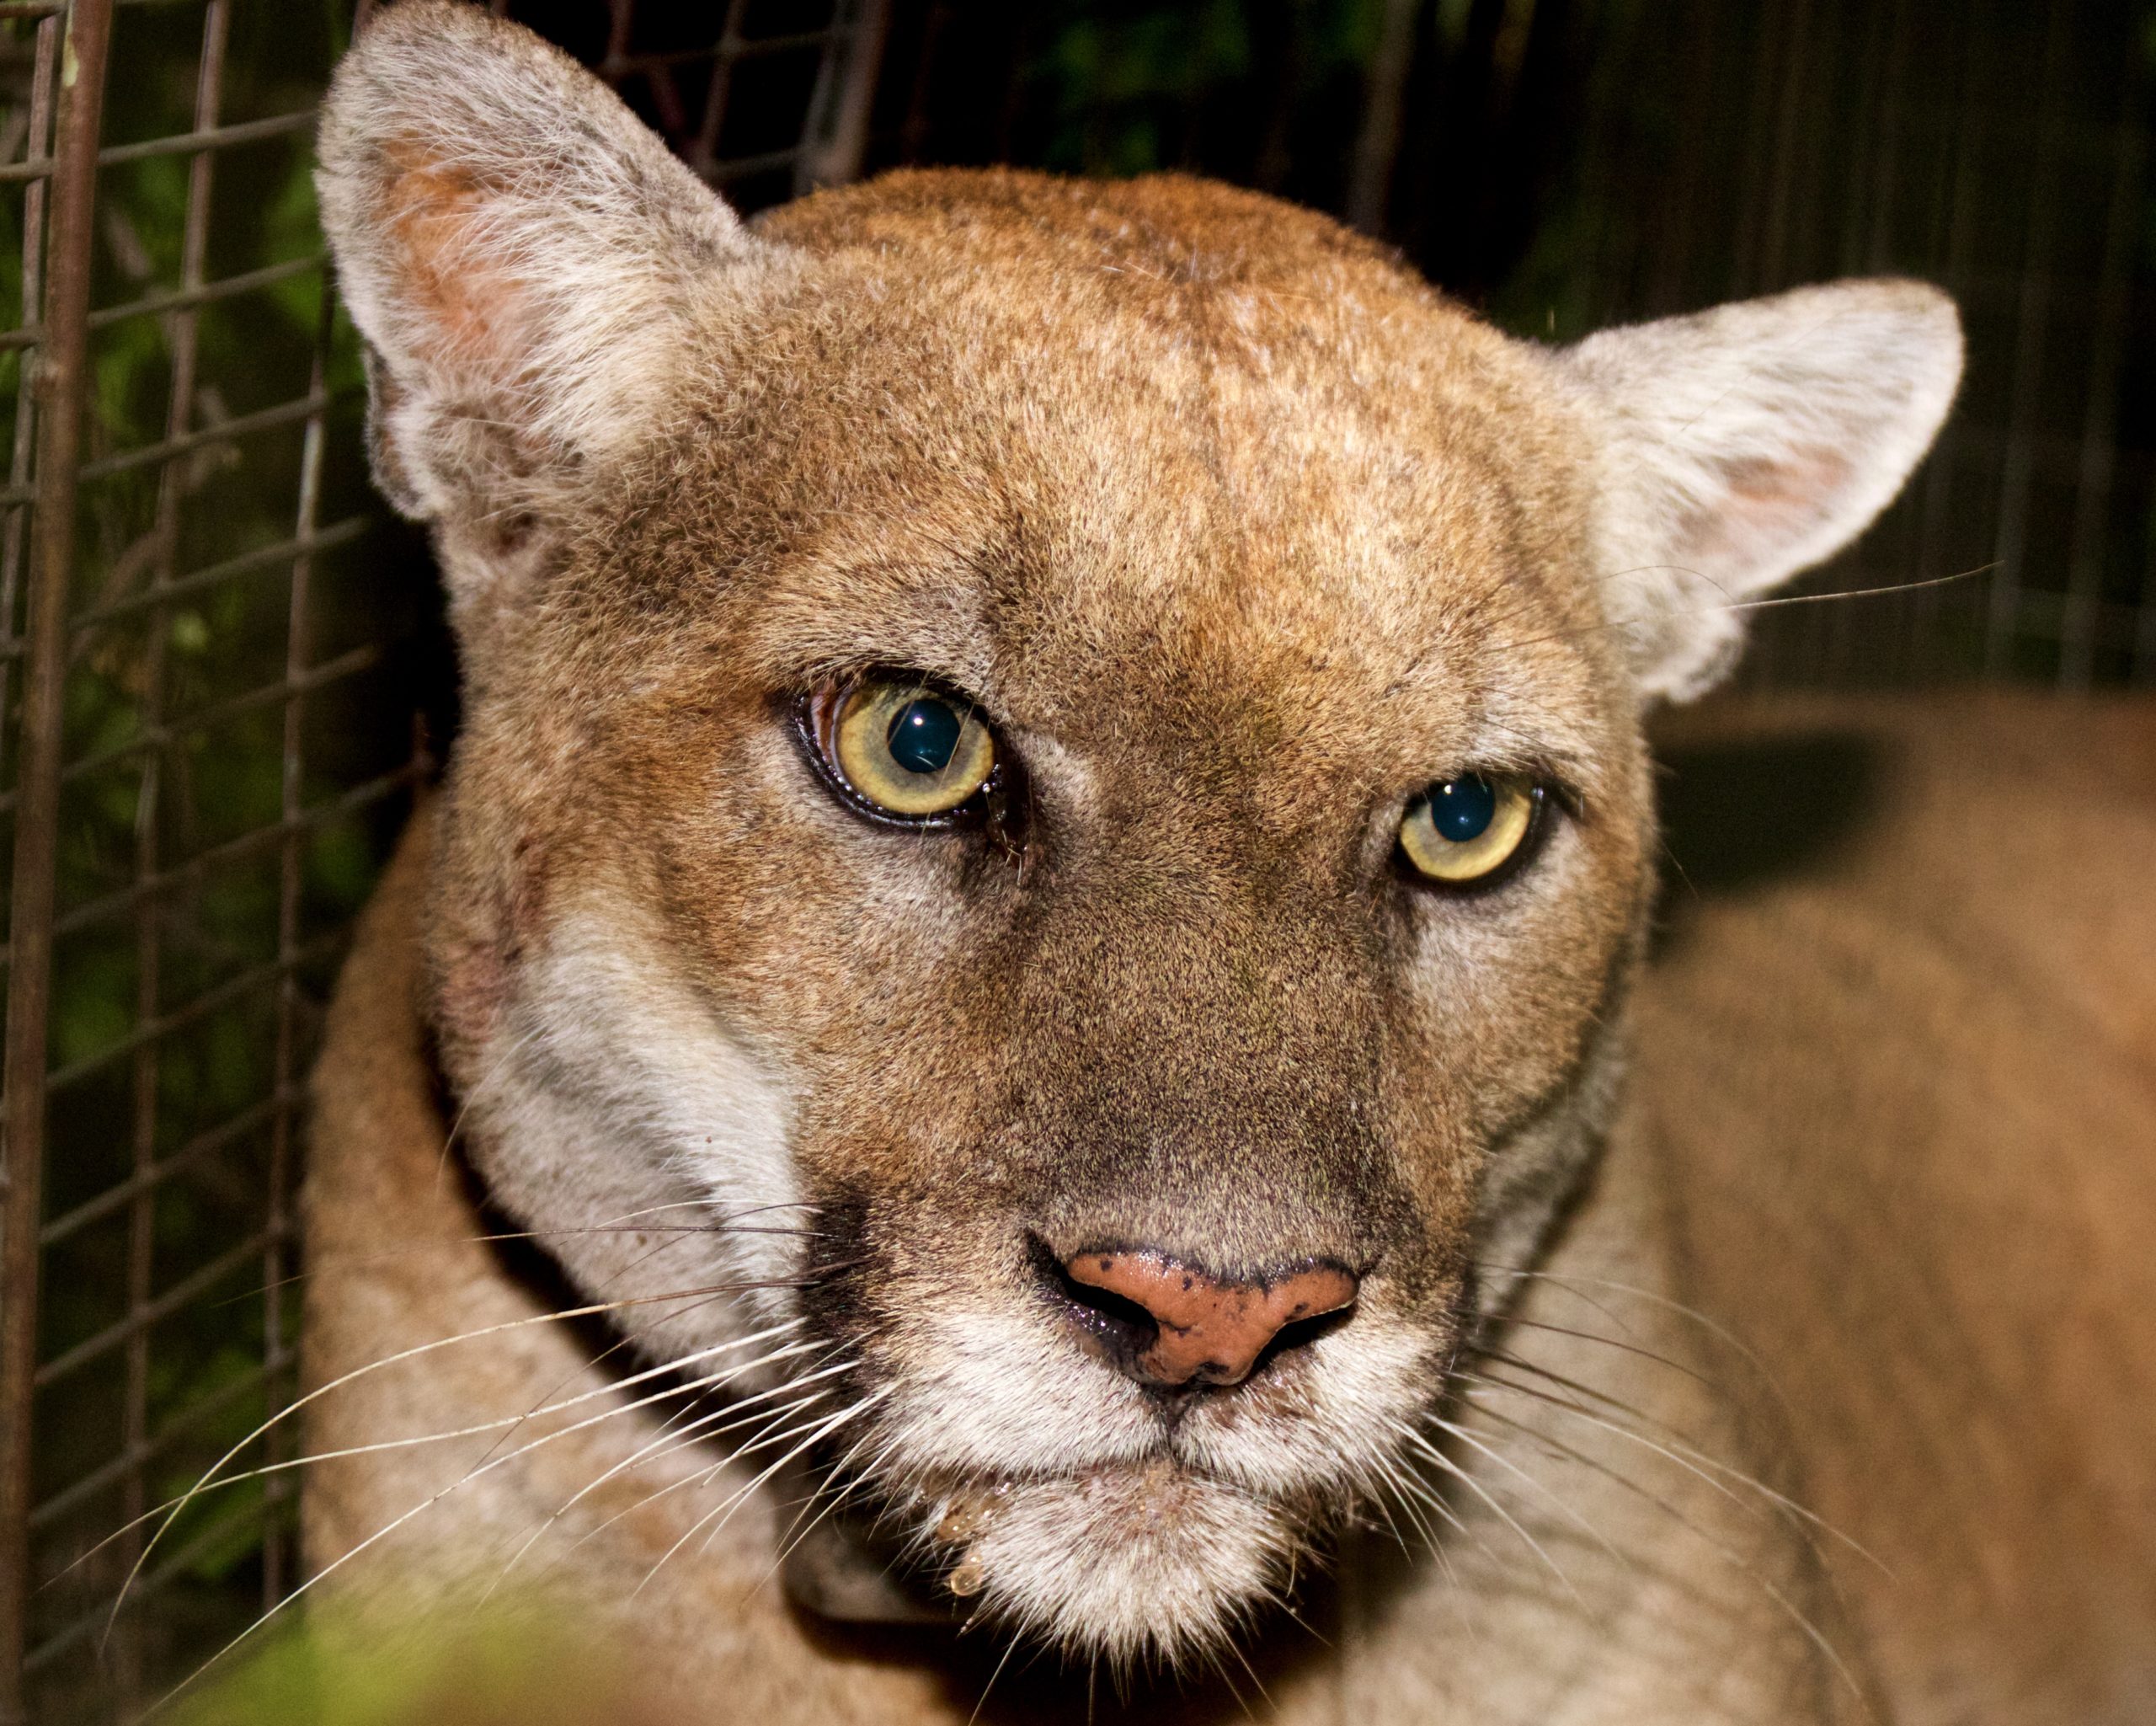 Closeup of P-22, a mountain lion that lived in Griffith Park in the middle of Los Angeles. His eyes are open and he looks of camera waiting for his tracking collar battery to be replaced.